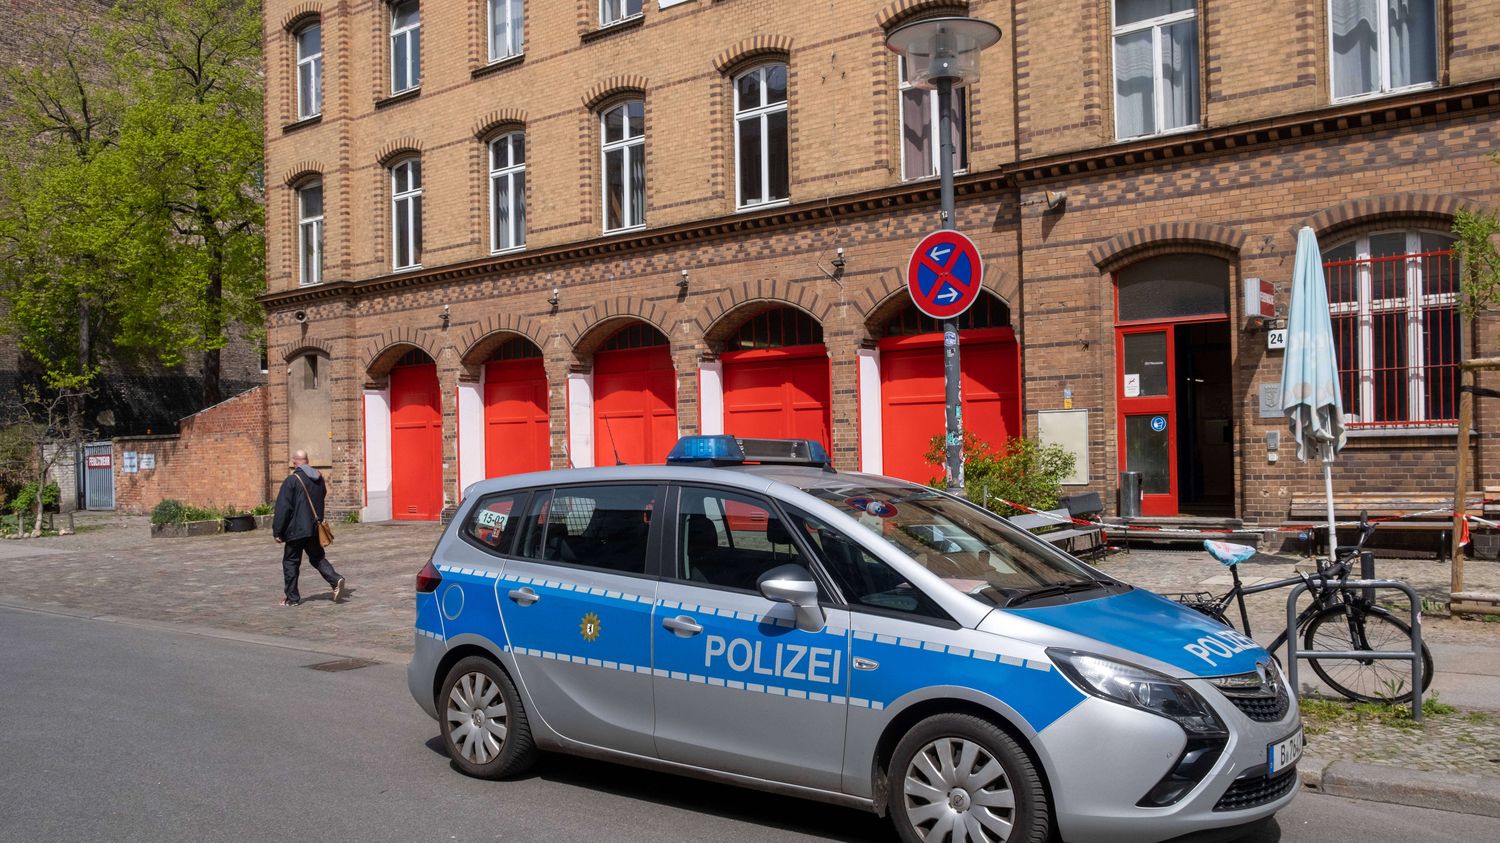 Germany: an investigation opened for suspicion of poisoning of Russian dissidents in exile
